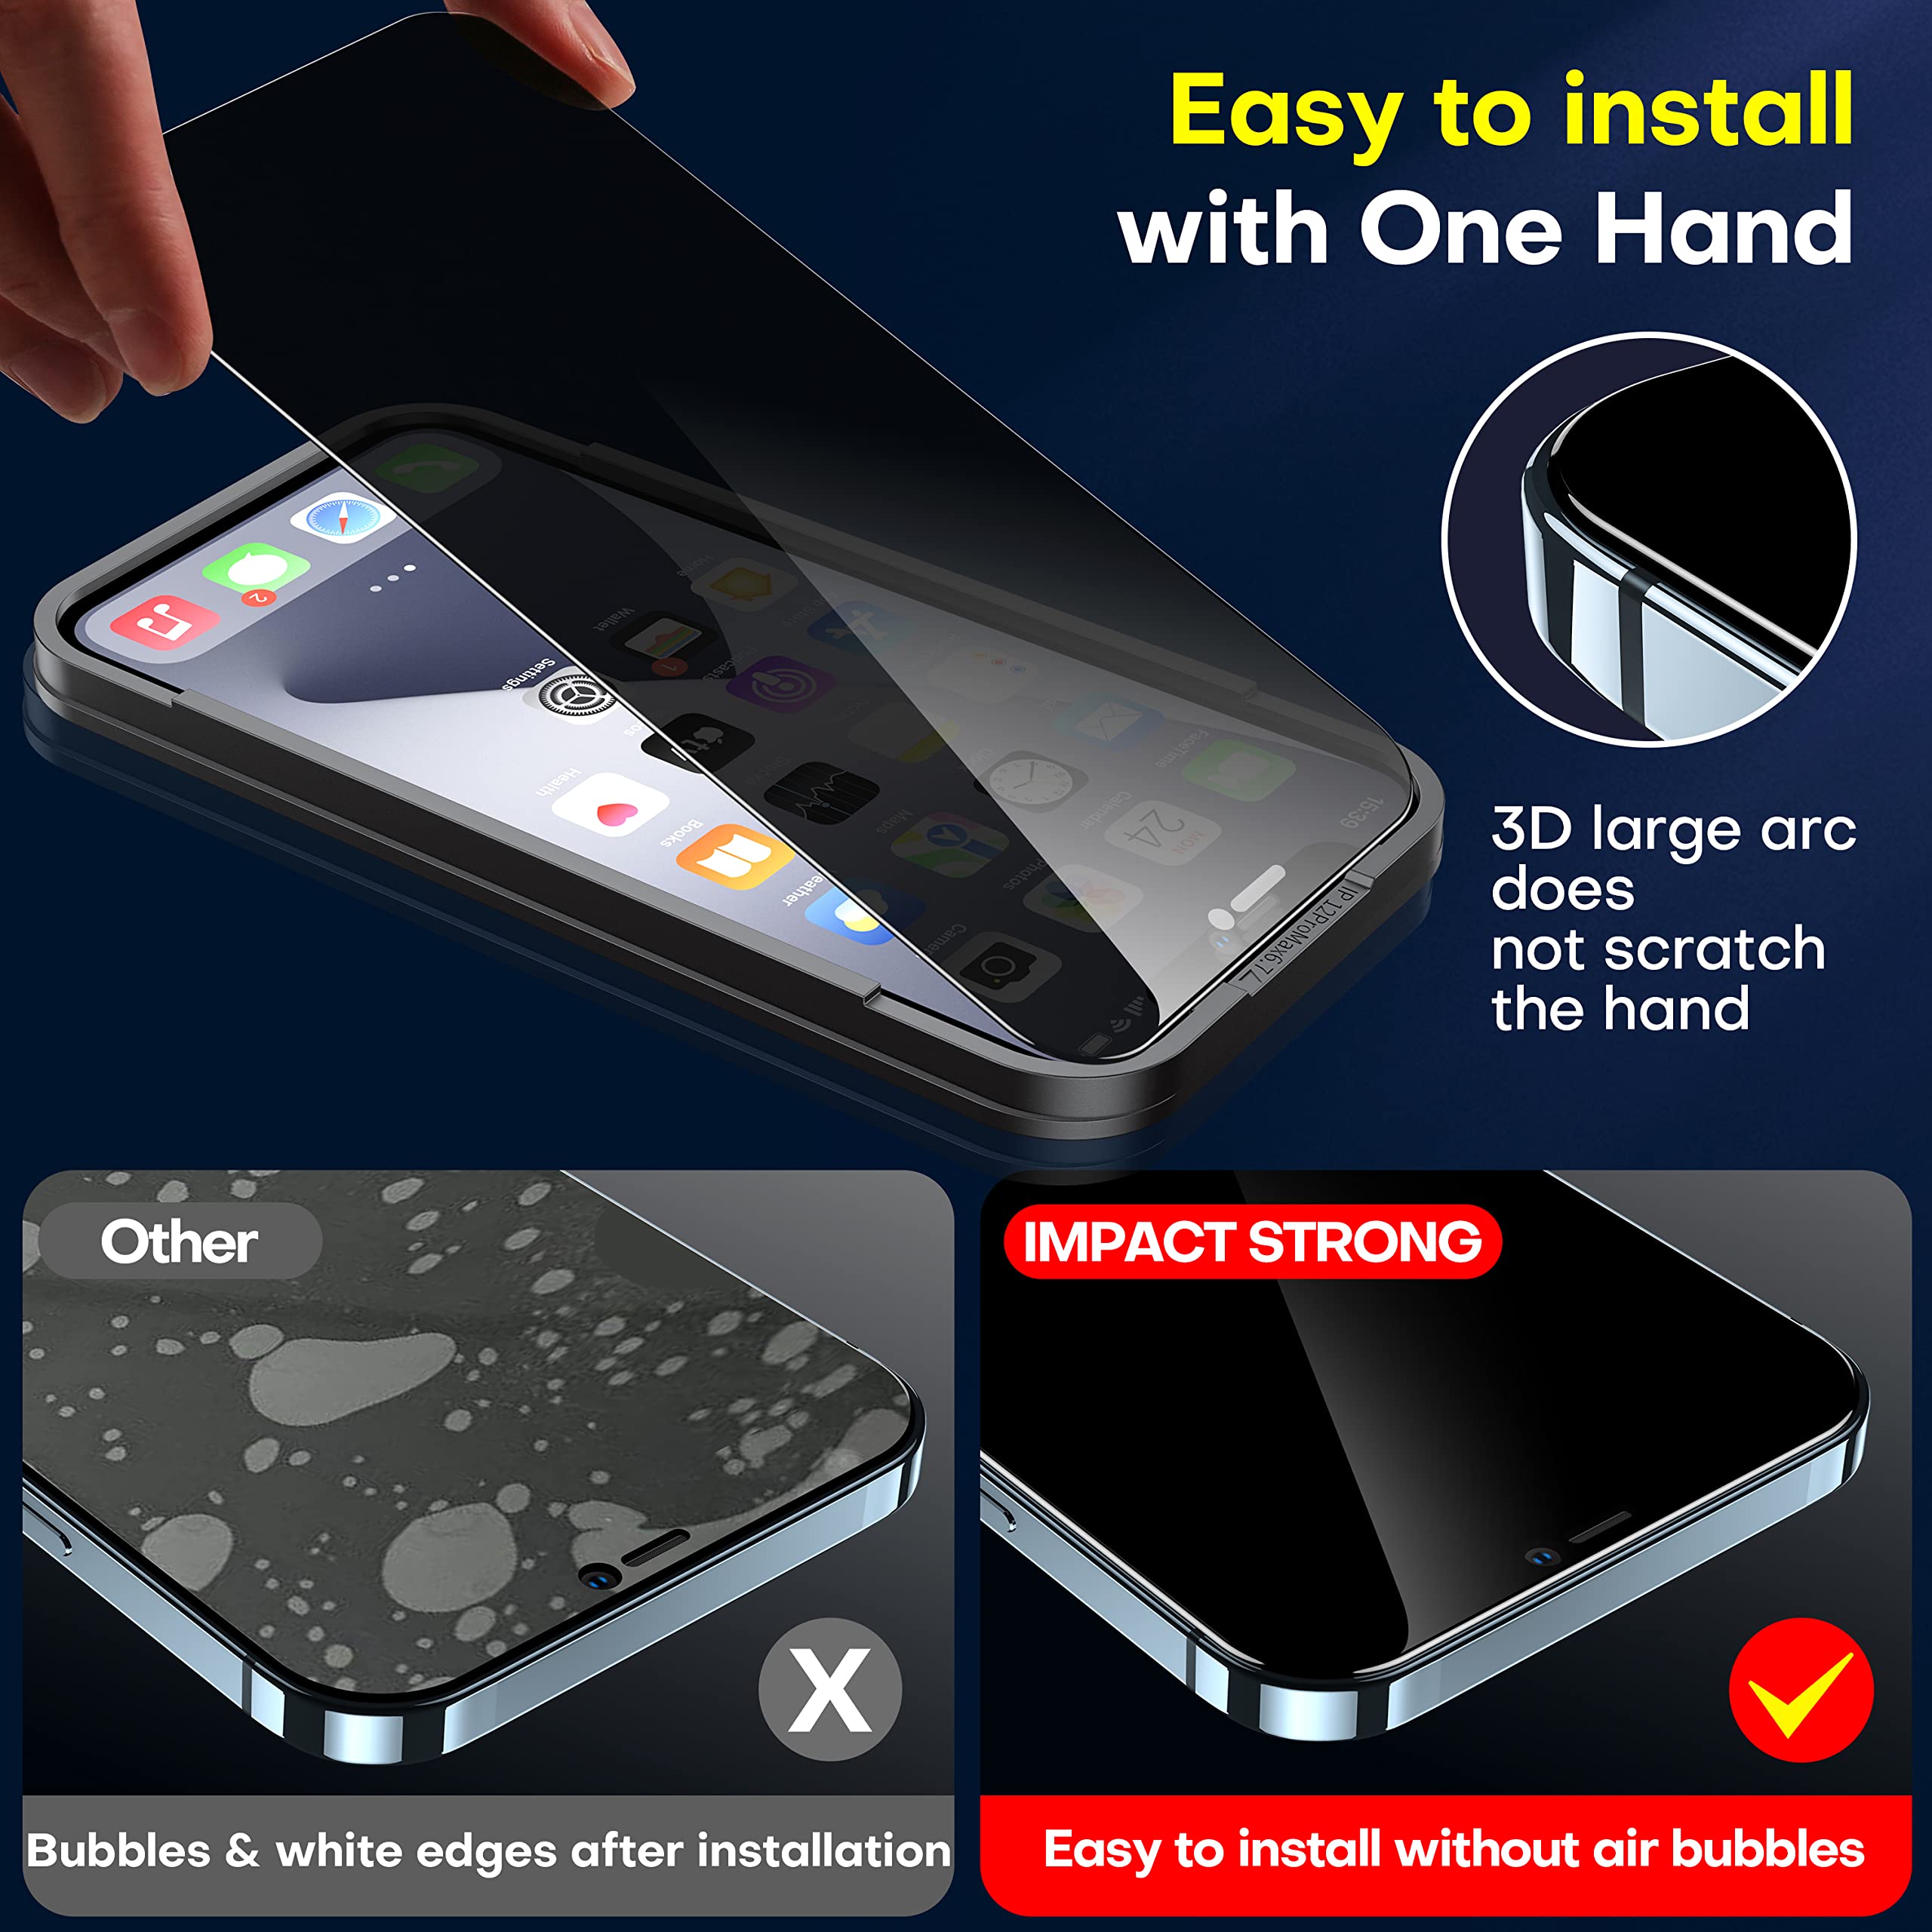 Shatterproof Tempered Glass Screen Protector for iPhone